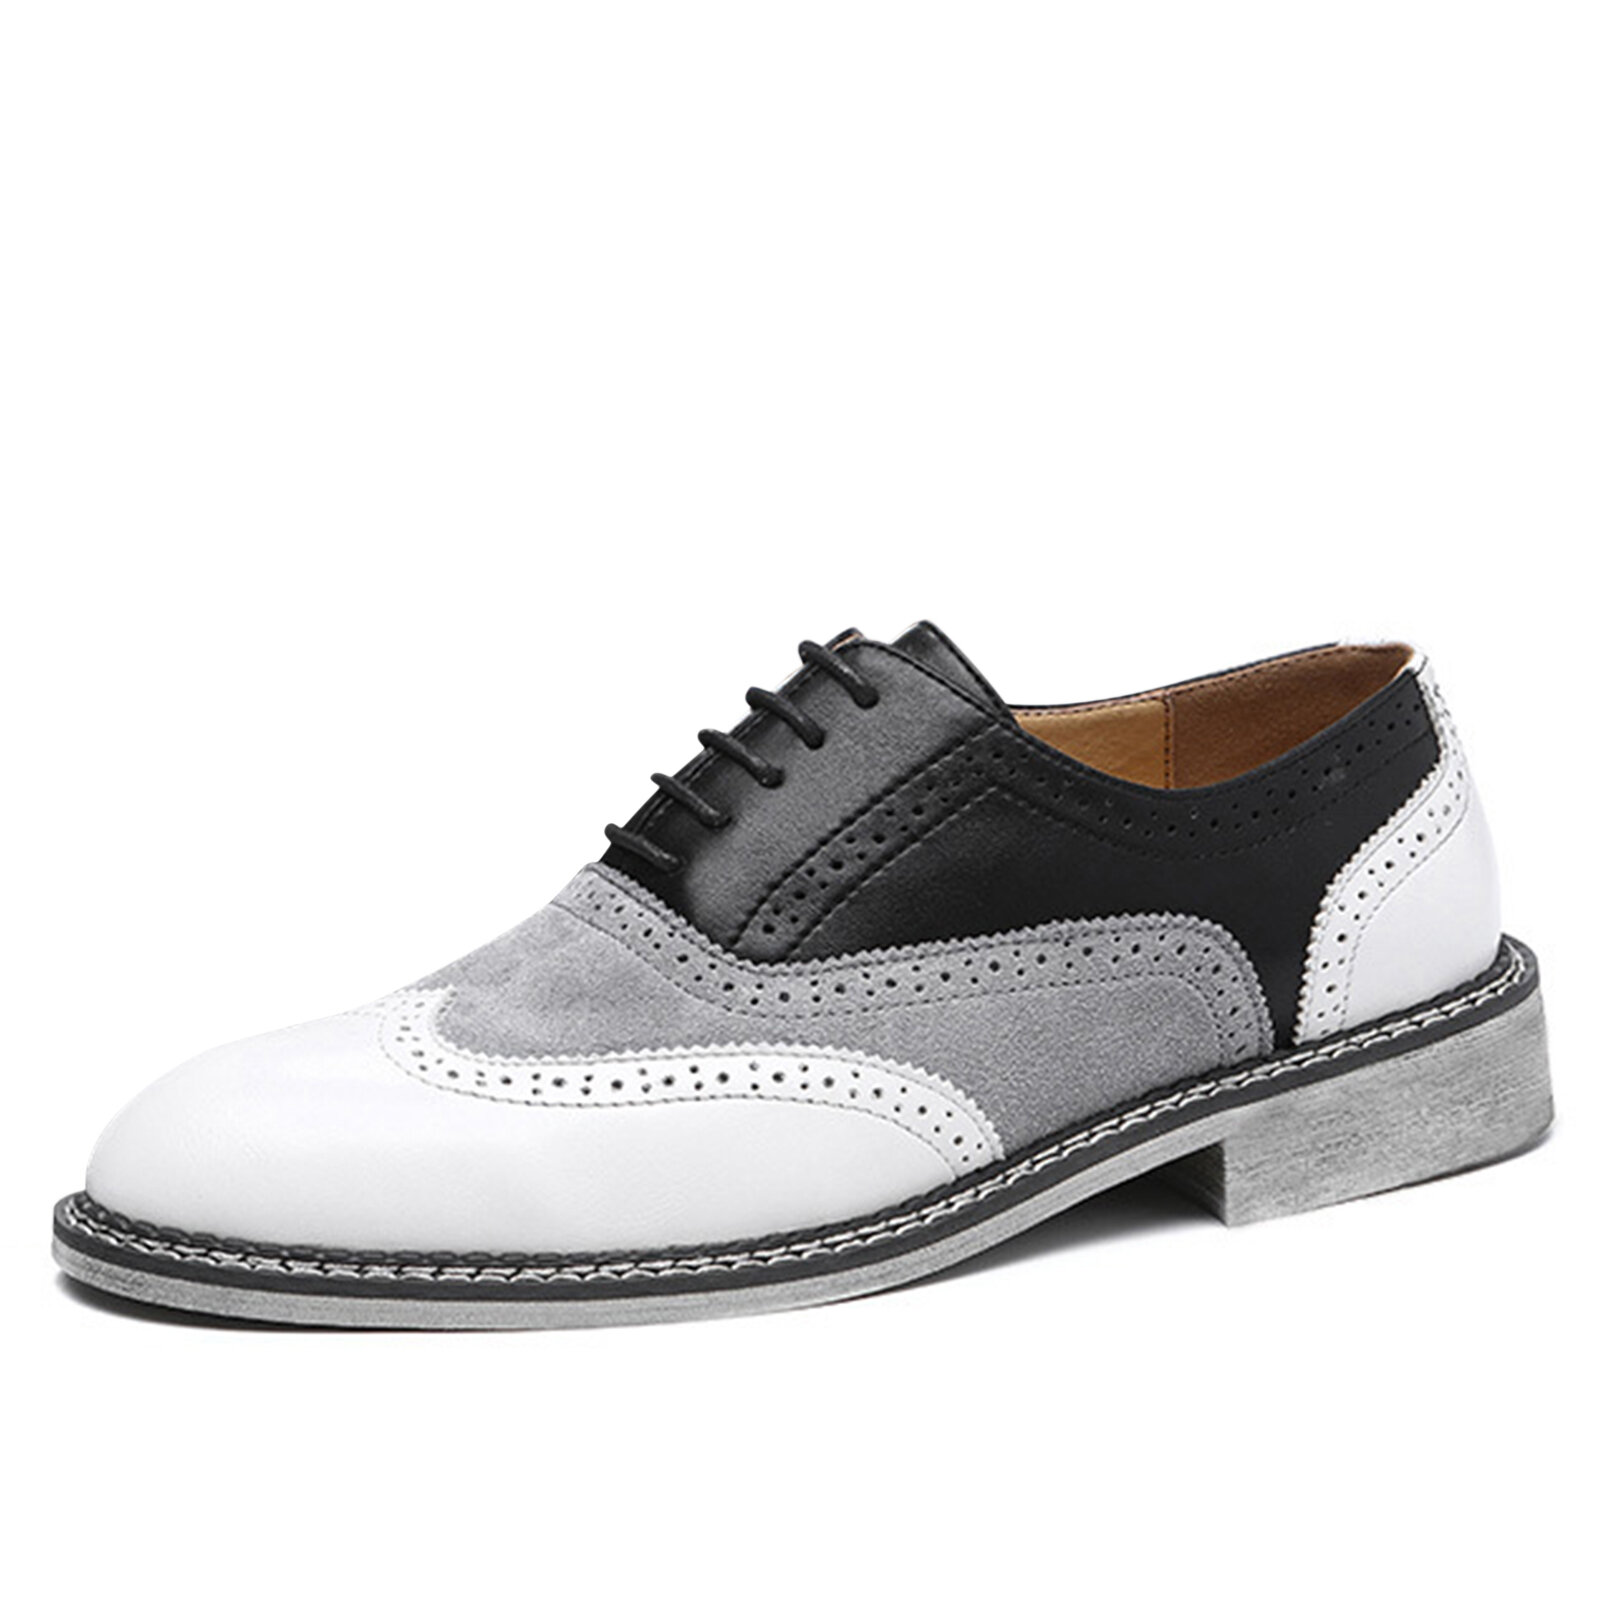 Men Breathable Lace-Up Brogue Carved British Dress Shoes